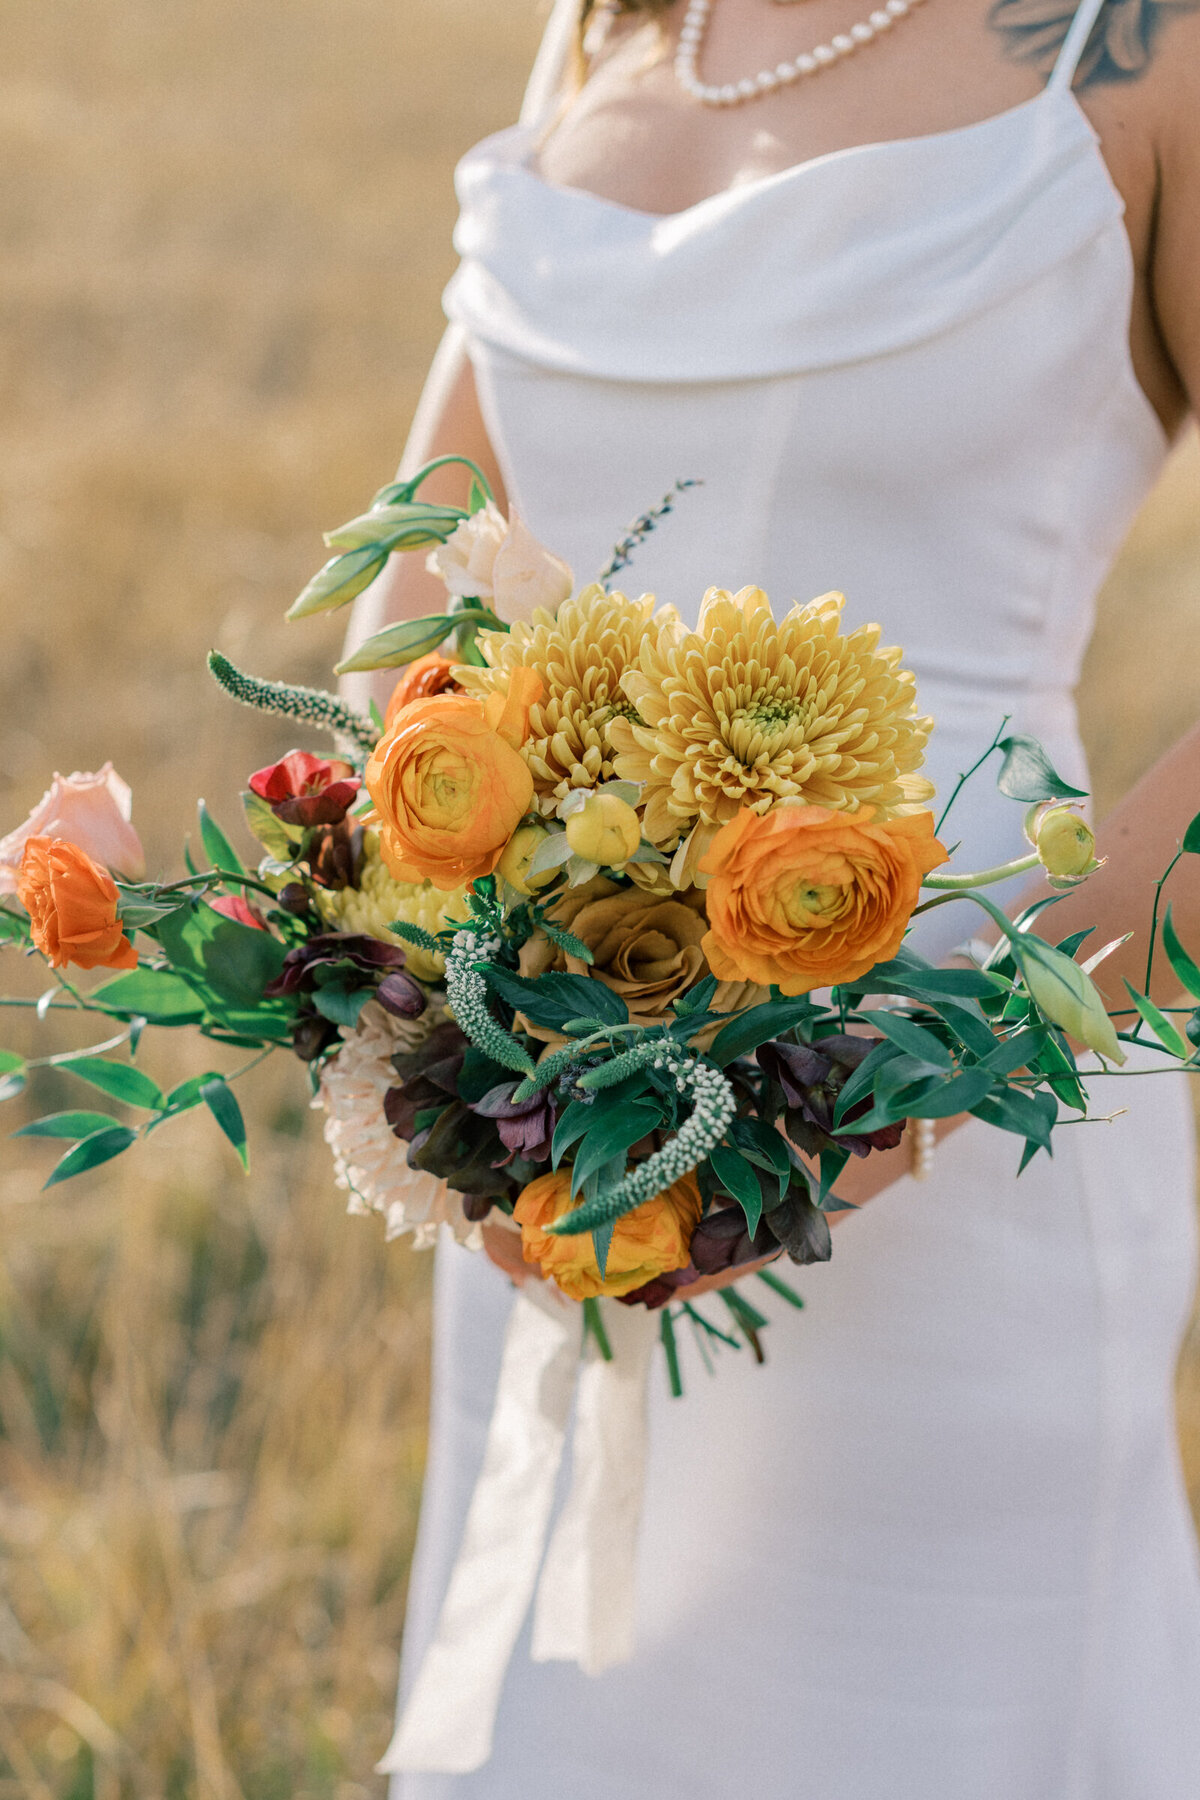 Steamboat_Springs_Ranch_wedding_Mary_Ann_craddock_photography_0042